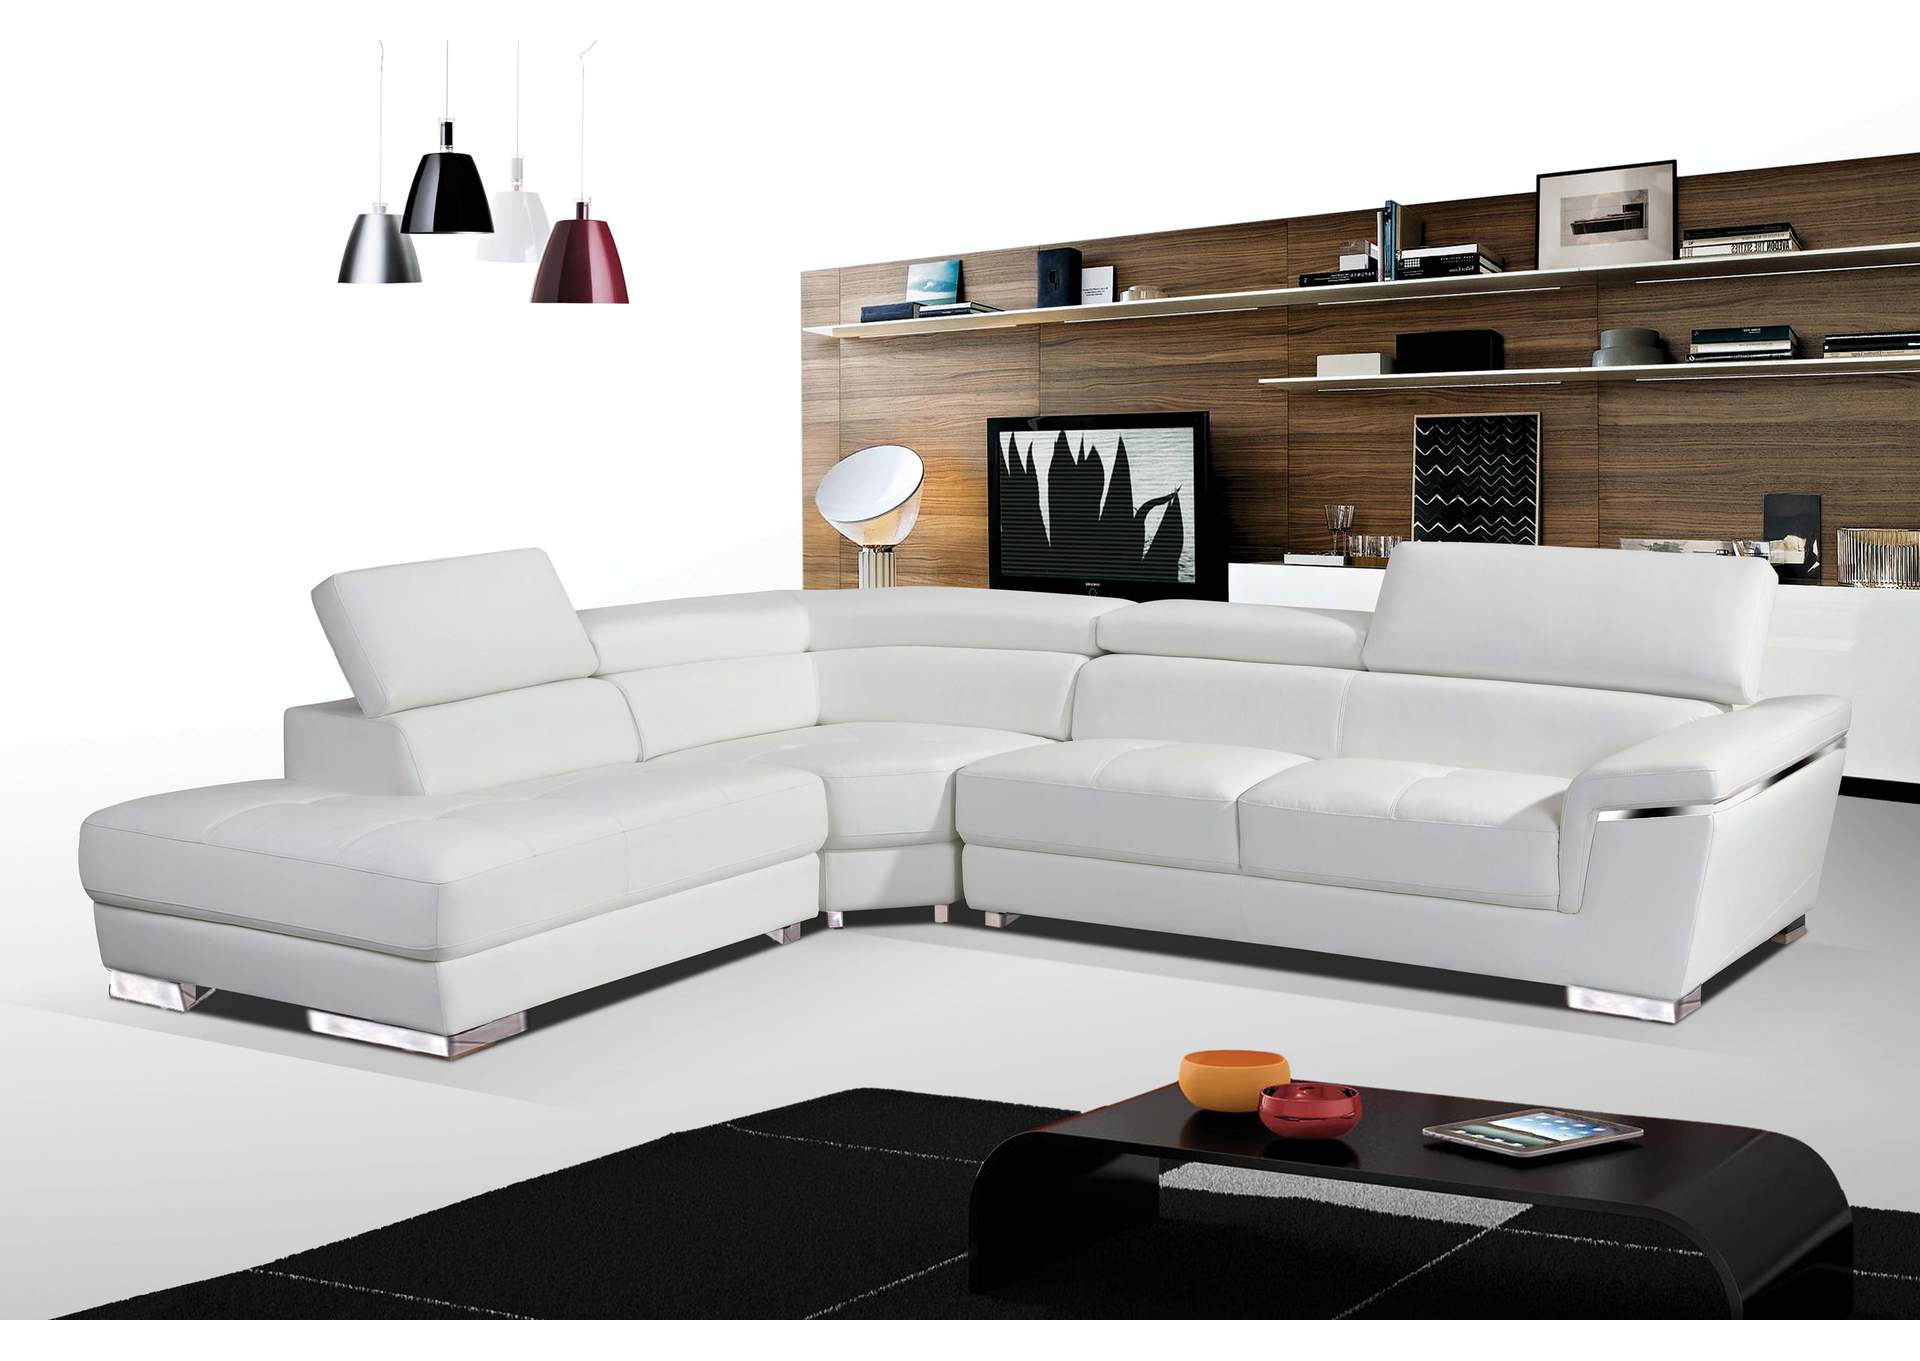 2383 Sectional Right,ESF Wholesale Furniture